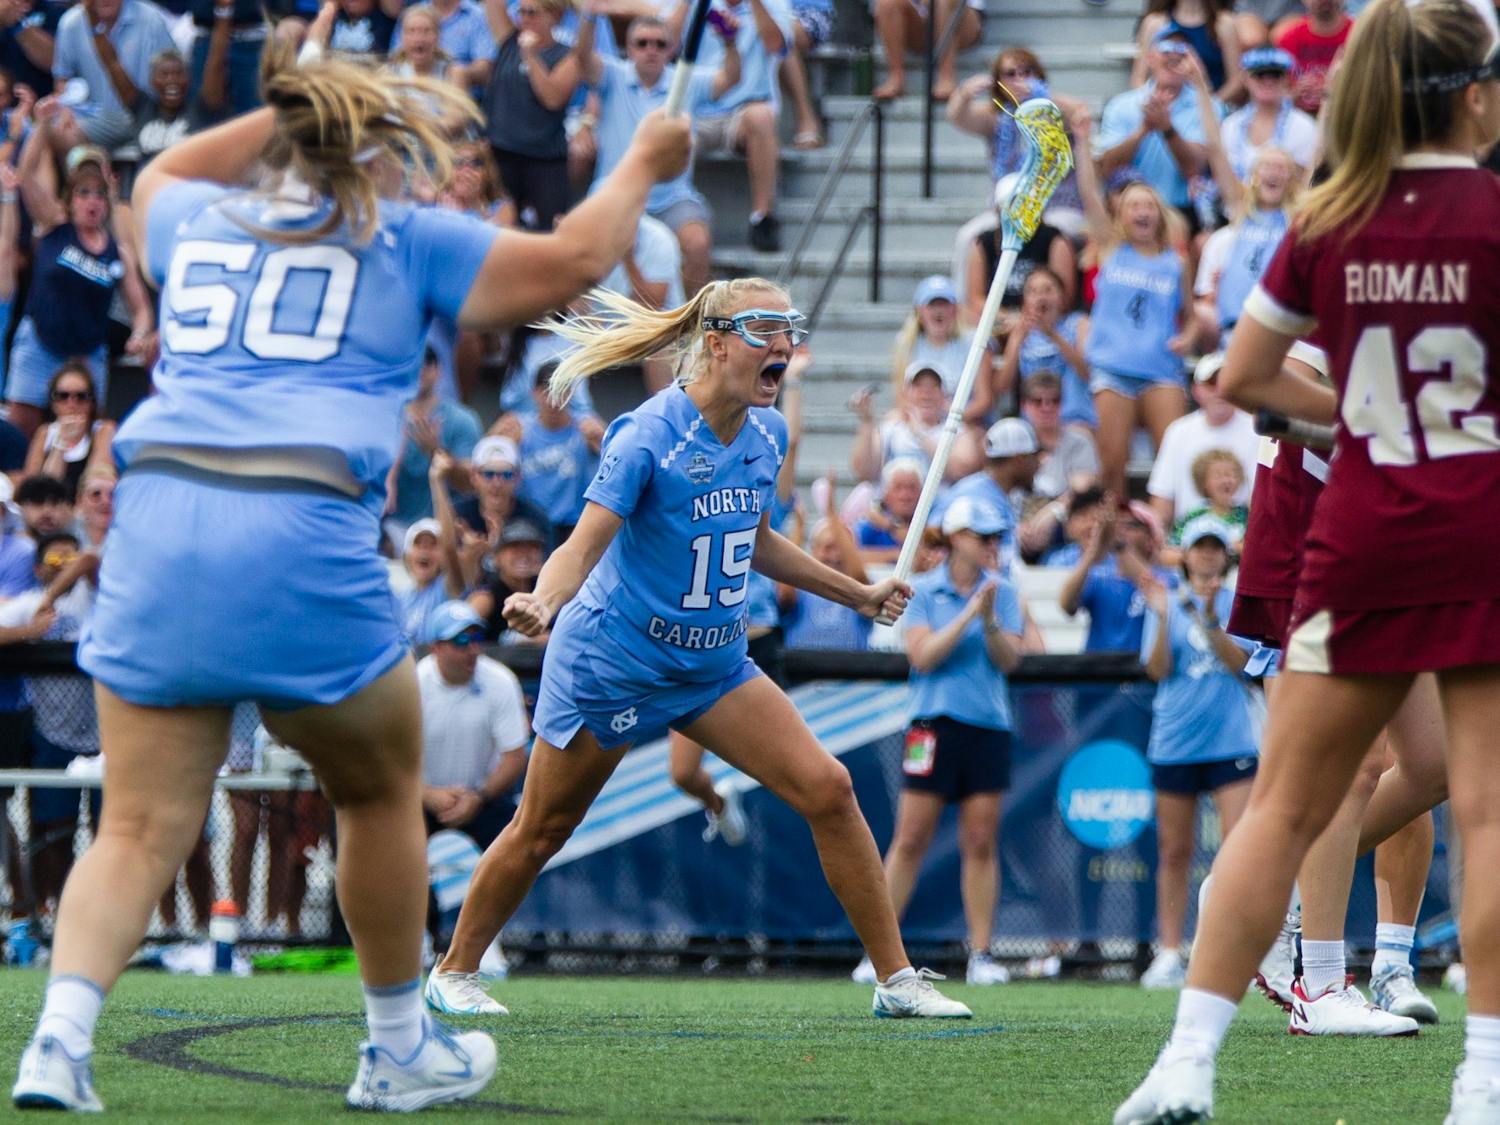 Fifth-year attacker Scottie Rose Growney (15) celebrates after scoring a goal during UNC’s NCAA national championship game against Boston College at Homewood Field in Baltimore, Md. on May 29, 2022. UNC won 12-11.